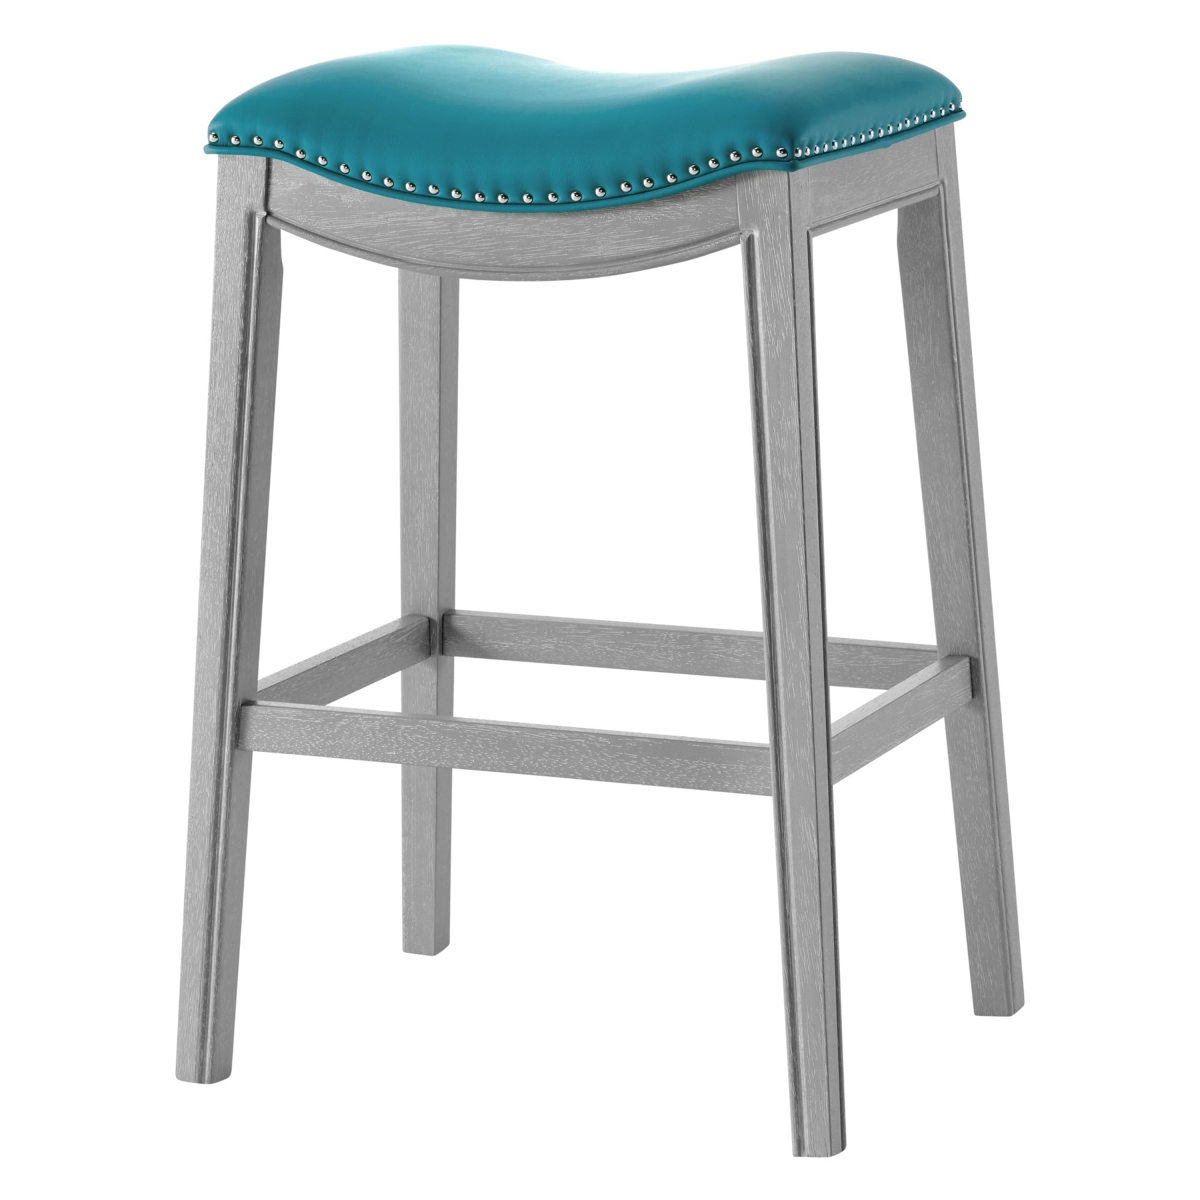 1330003-388 16.5 X 21 X 30 In. Grover Pu Leather Bar Stool, Matt Turquoise Blue